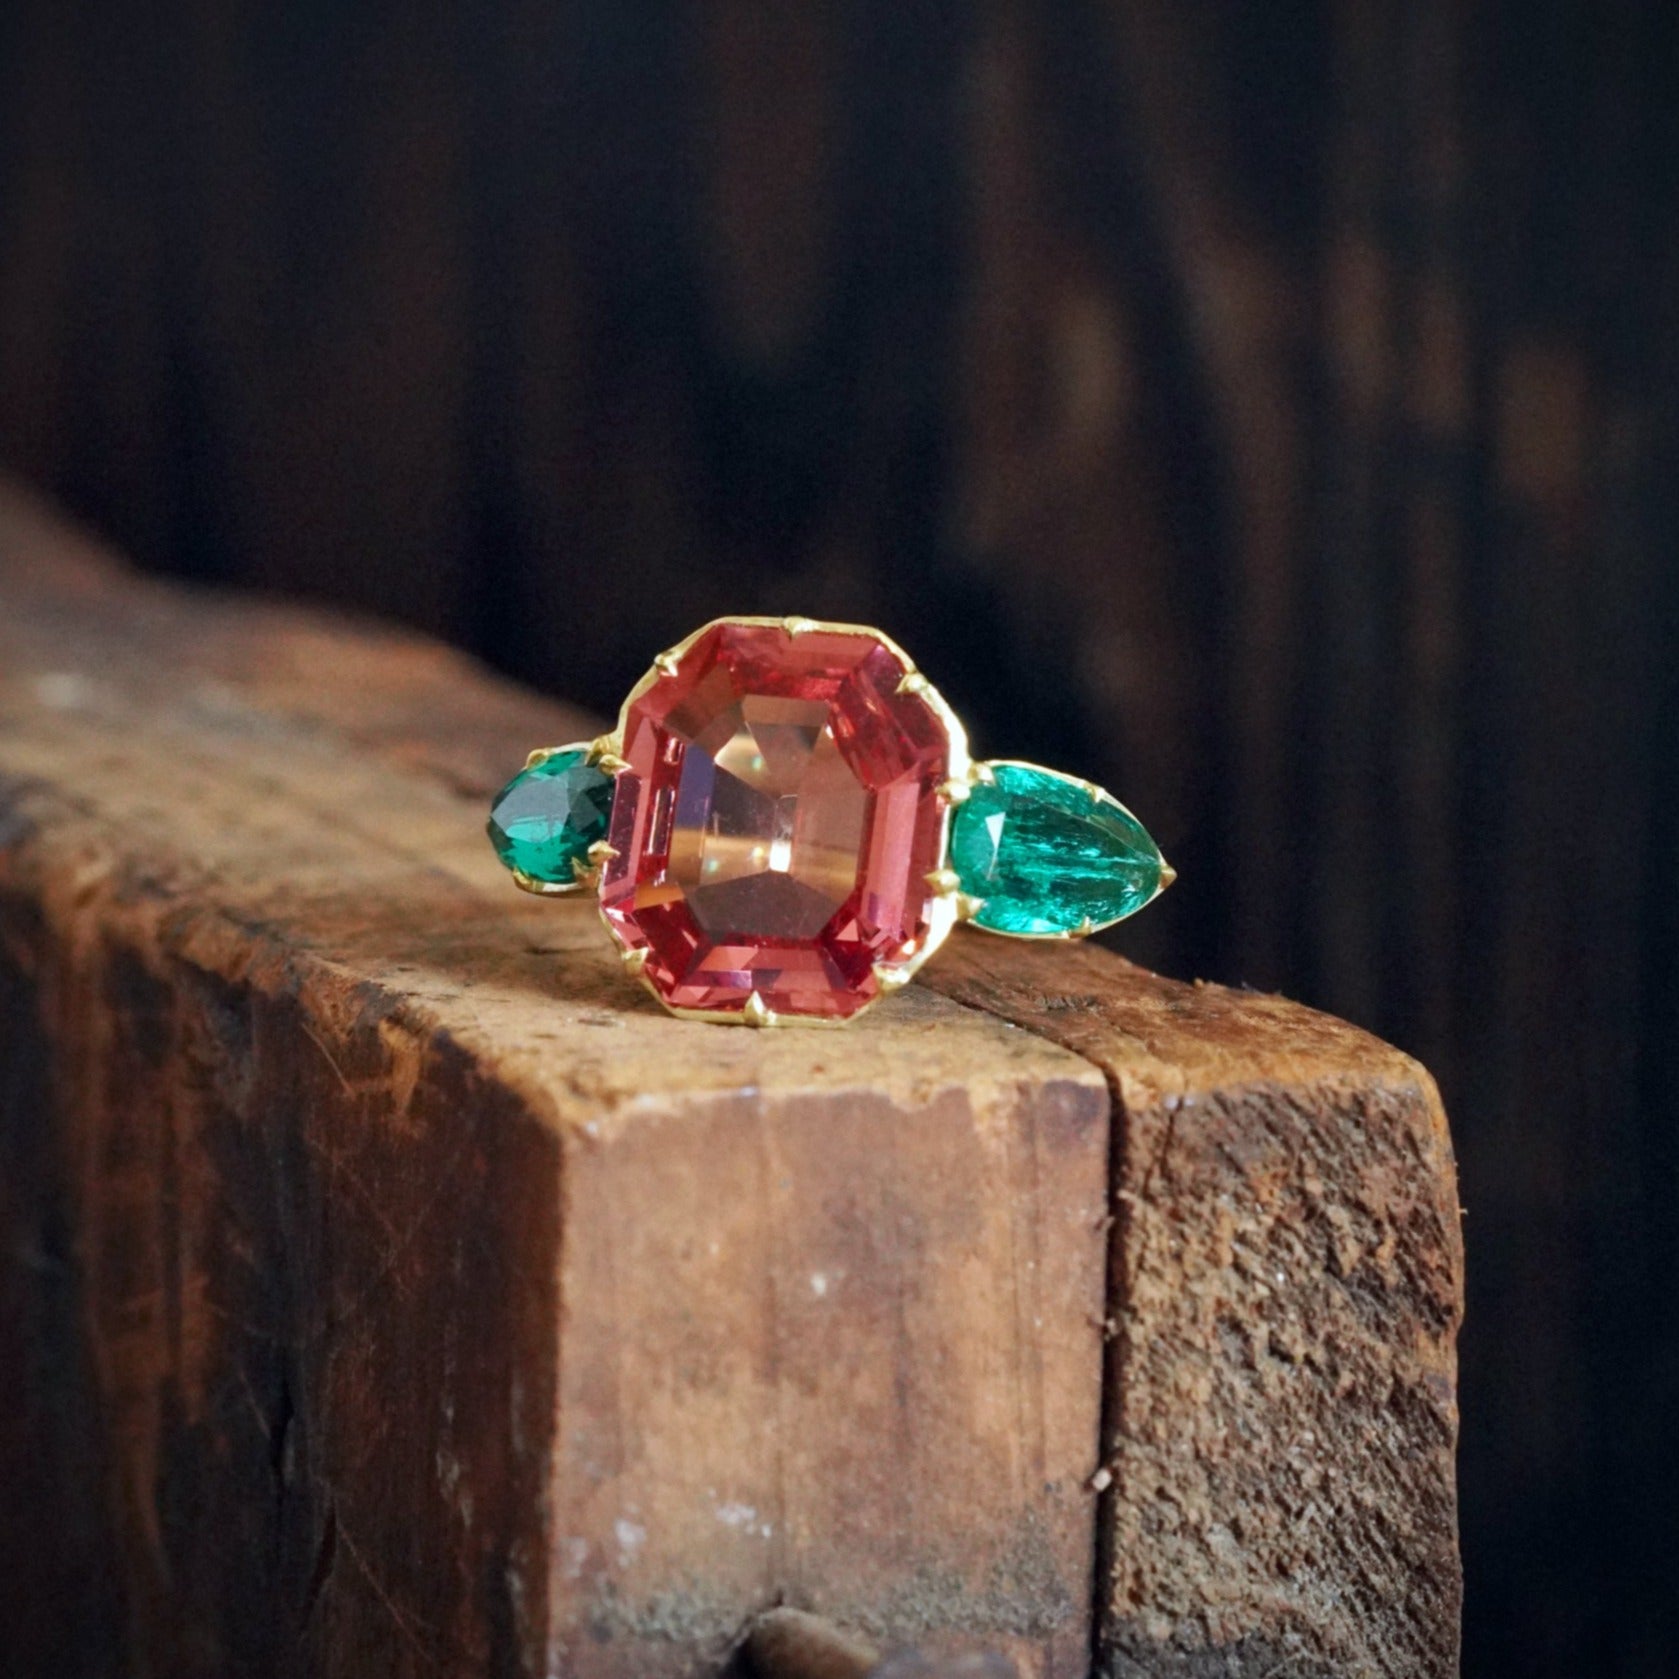 Exquisite 7.08ct Spinel & Emerald Gold Ring